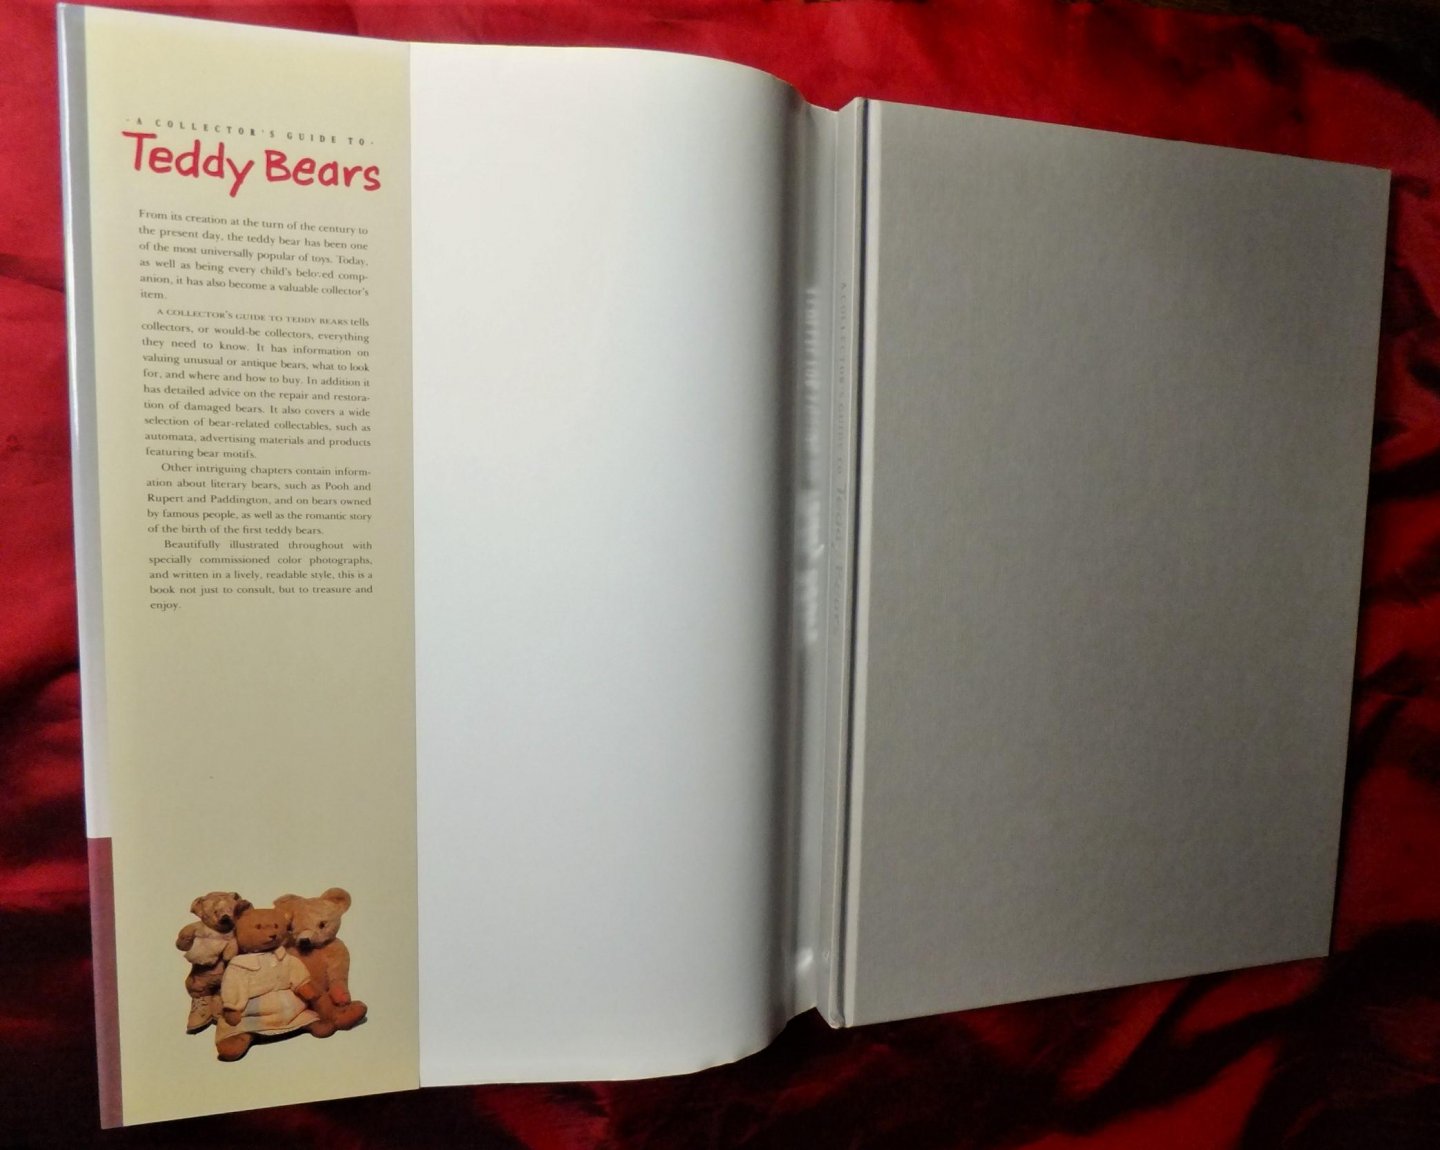 Ford, Peter - A collector's guide to TEDDY BEARS